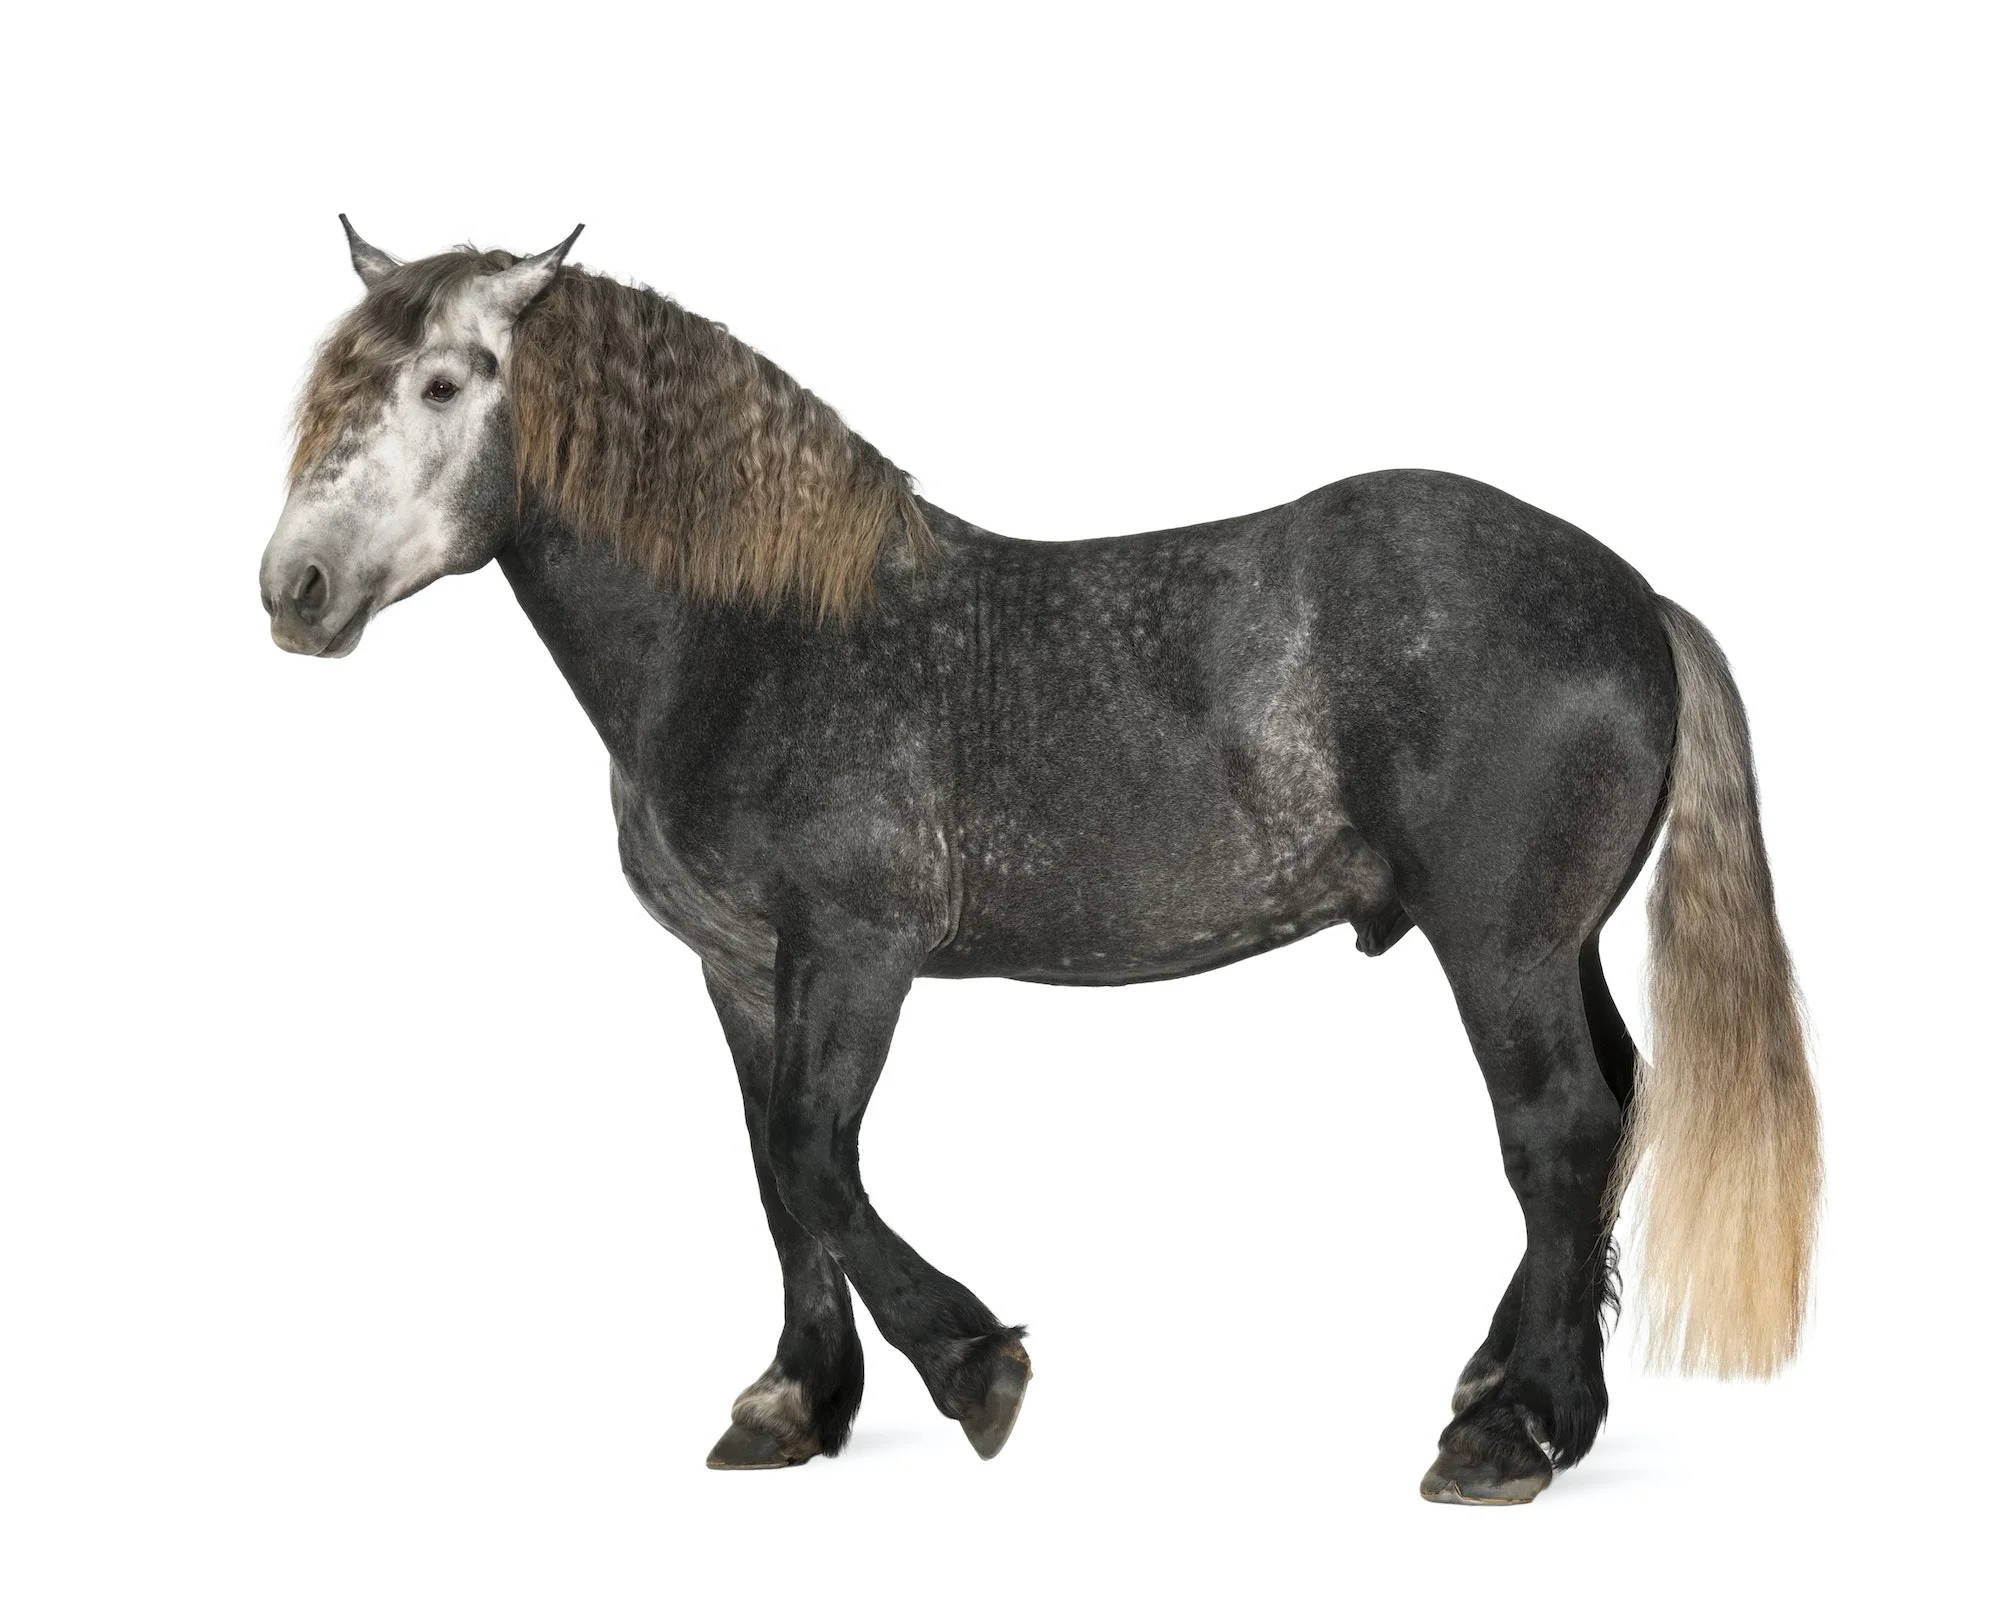 Percheron, 5 years old, a breed of draft horse, standing against white background